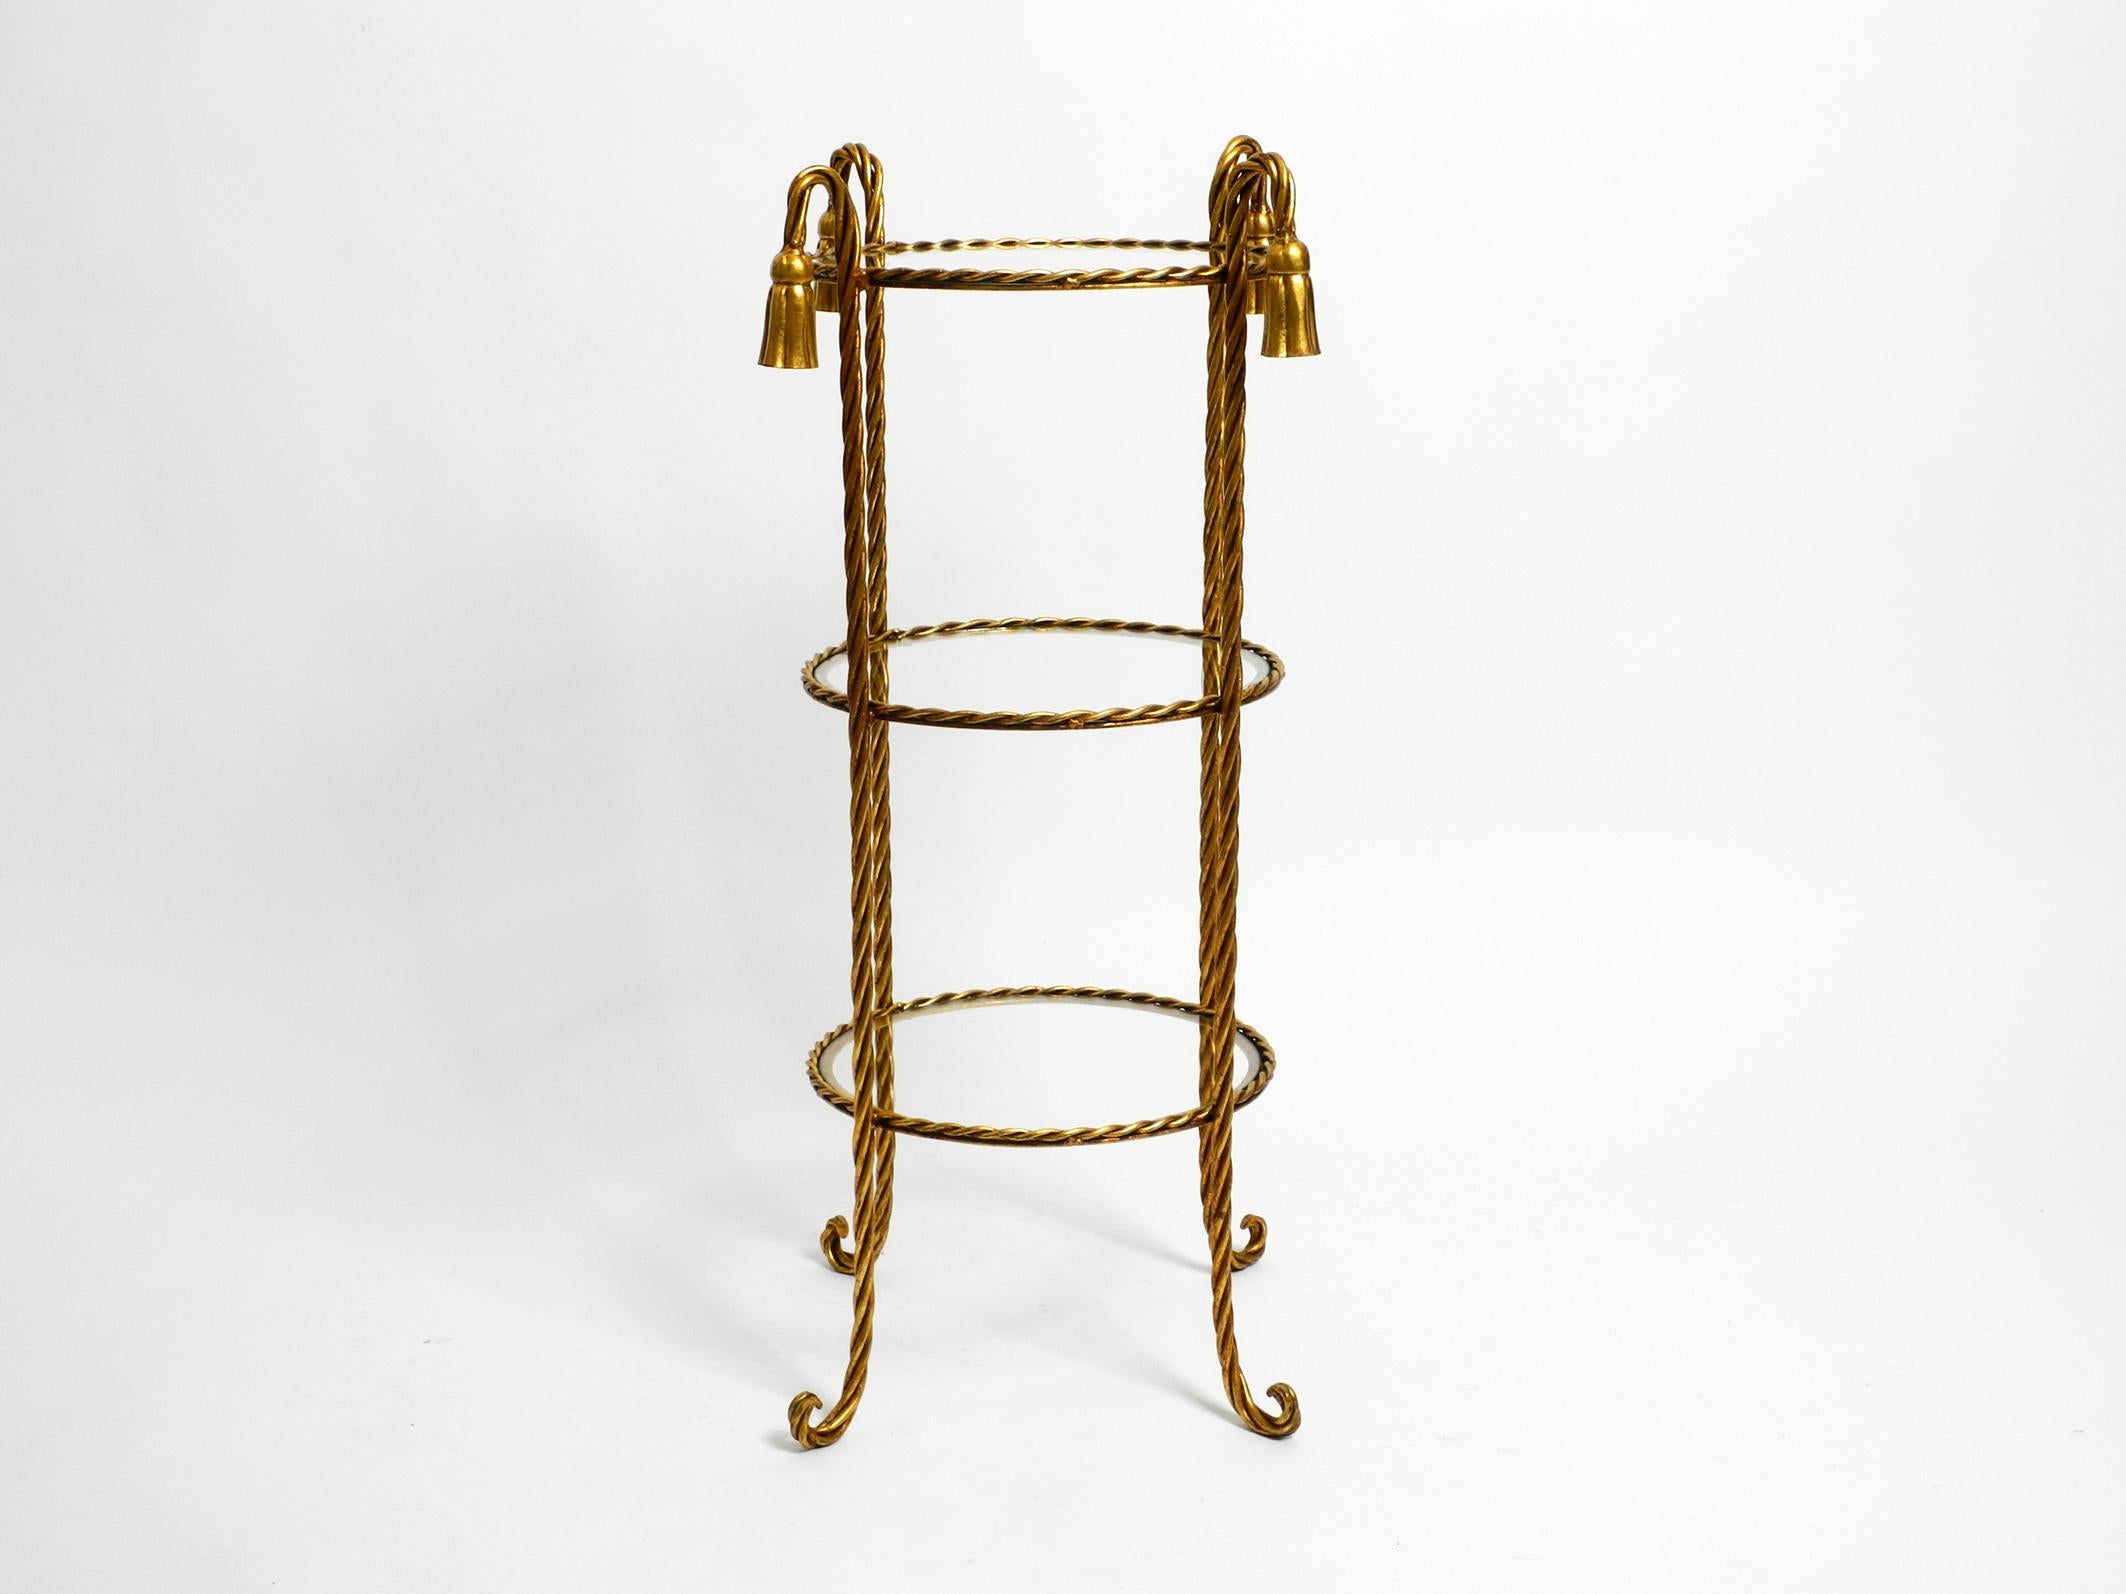 Very elegant Mid Century Regency side table made of gilded iron.
The manufacturer is Li Puma Firenze. Made in Italy. Very rare in height and width.
Made from twisted gilded iron. Very high quality, elegant workmanship.
Beautiful 1960s design with